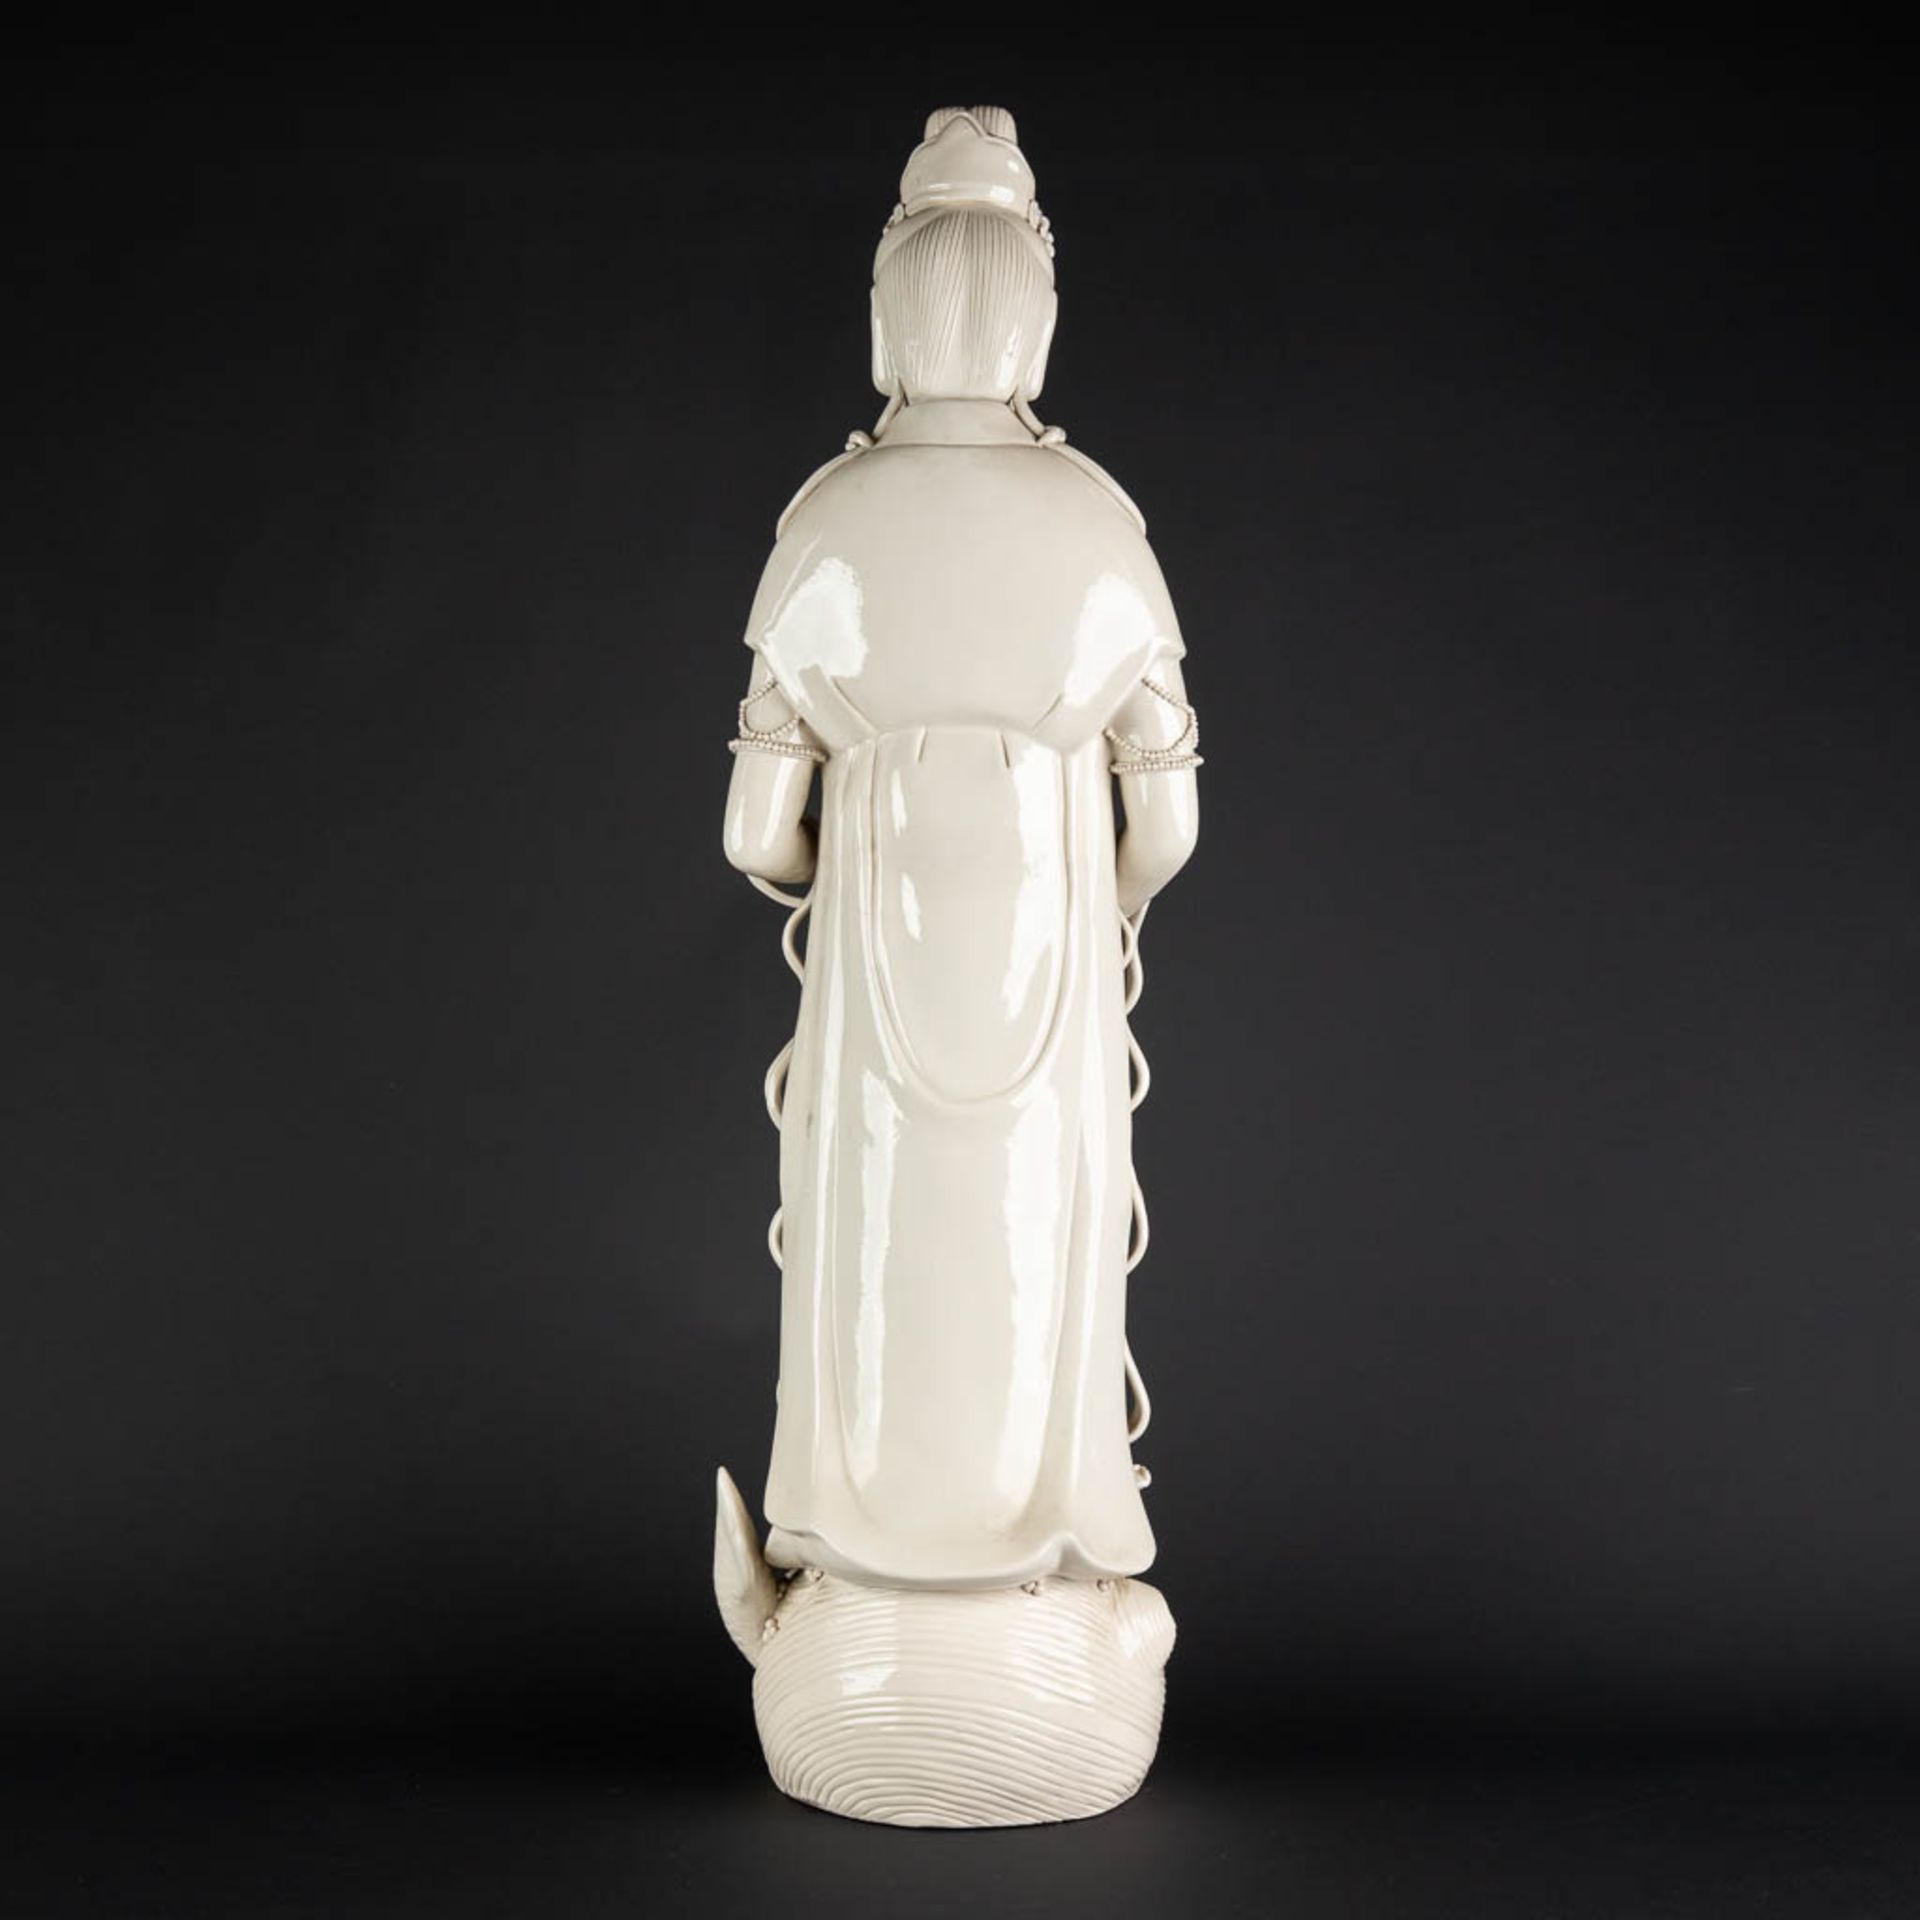 A large Chinese Guanyin figurine, blanc de chine porcelain. 20th C. (D:20 x W:23 x H:80 cm) - Image 5 of 13